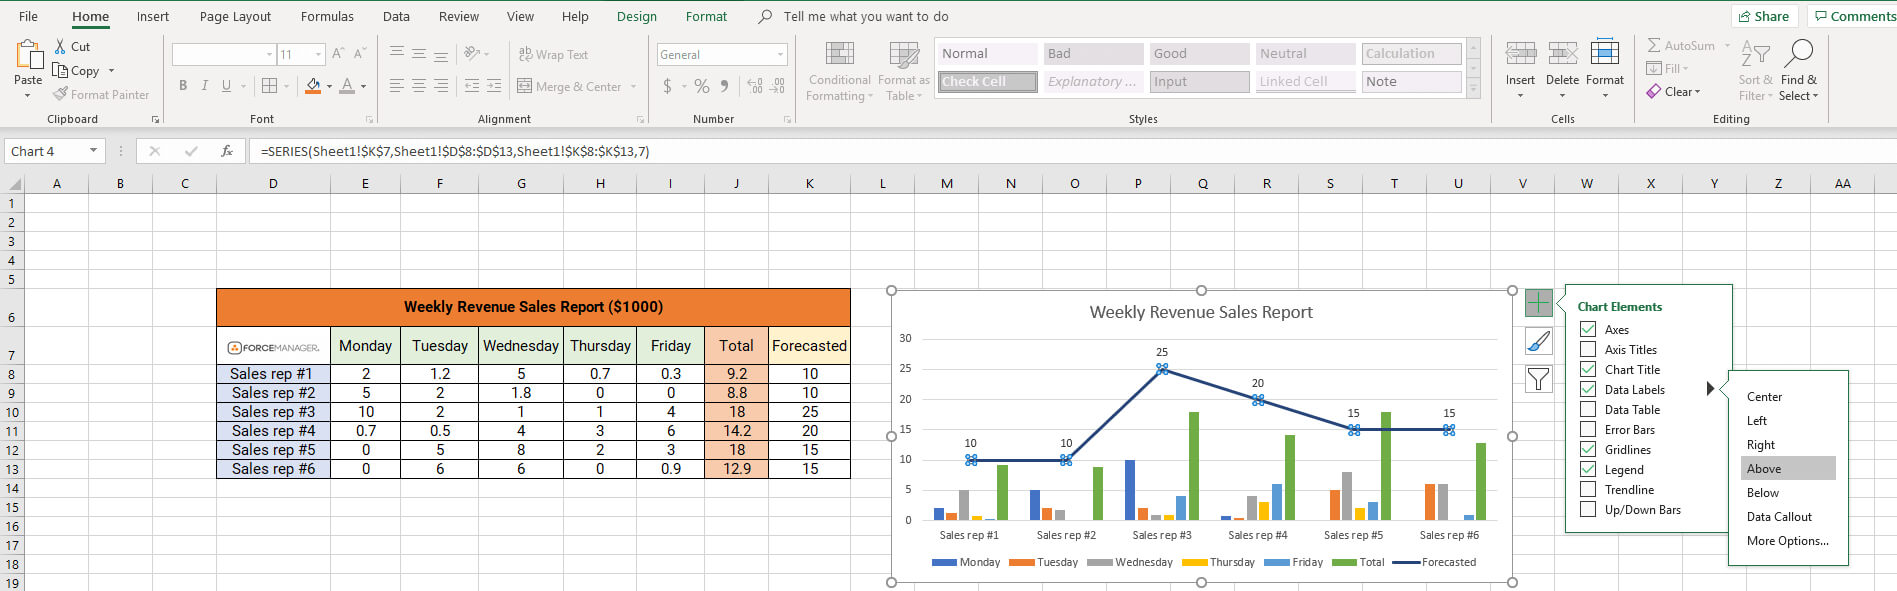 How To Make A Sales Report In Excel: The Pros And Cons Inside Sale Report Template Excel